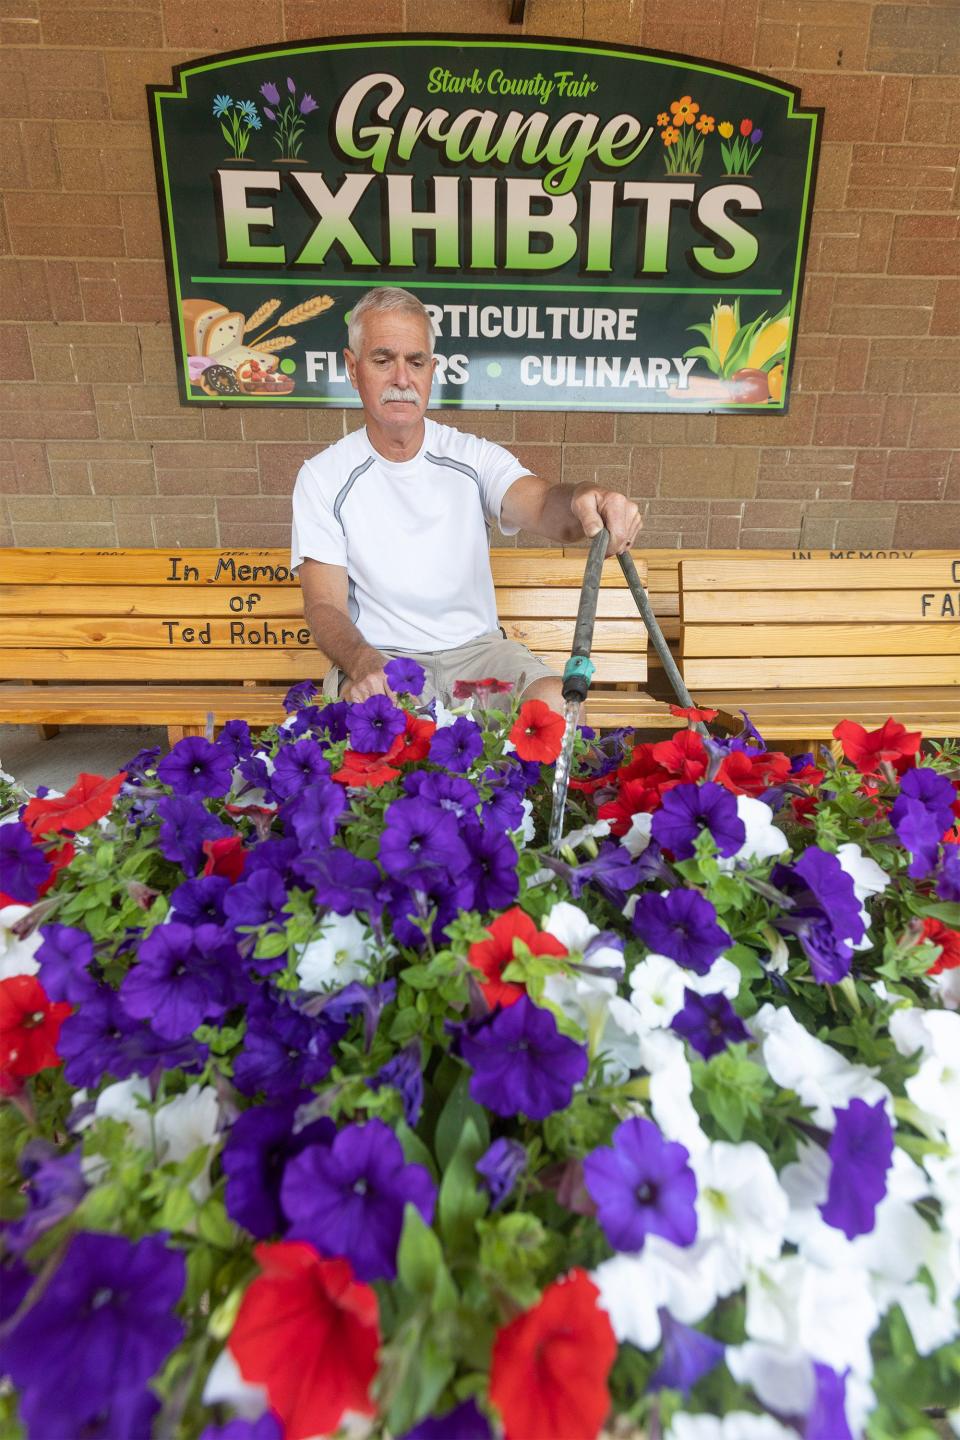 Russ Thorn, a fair director, waters petunias outside the Grange exhibits hall getting ready for the upcoming Stark County Fair.